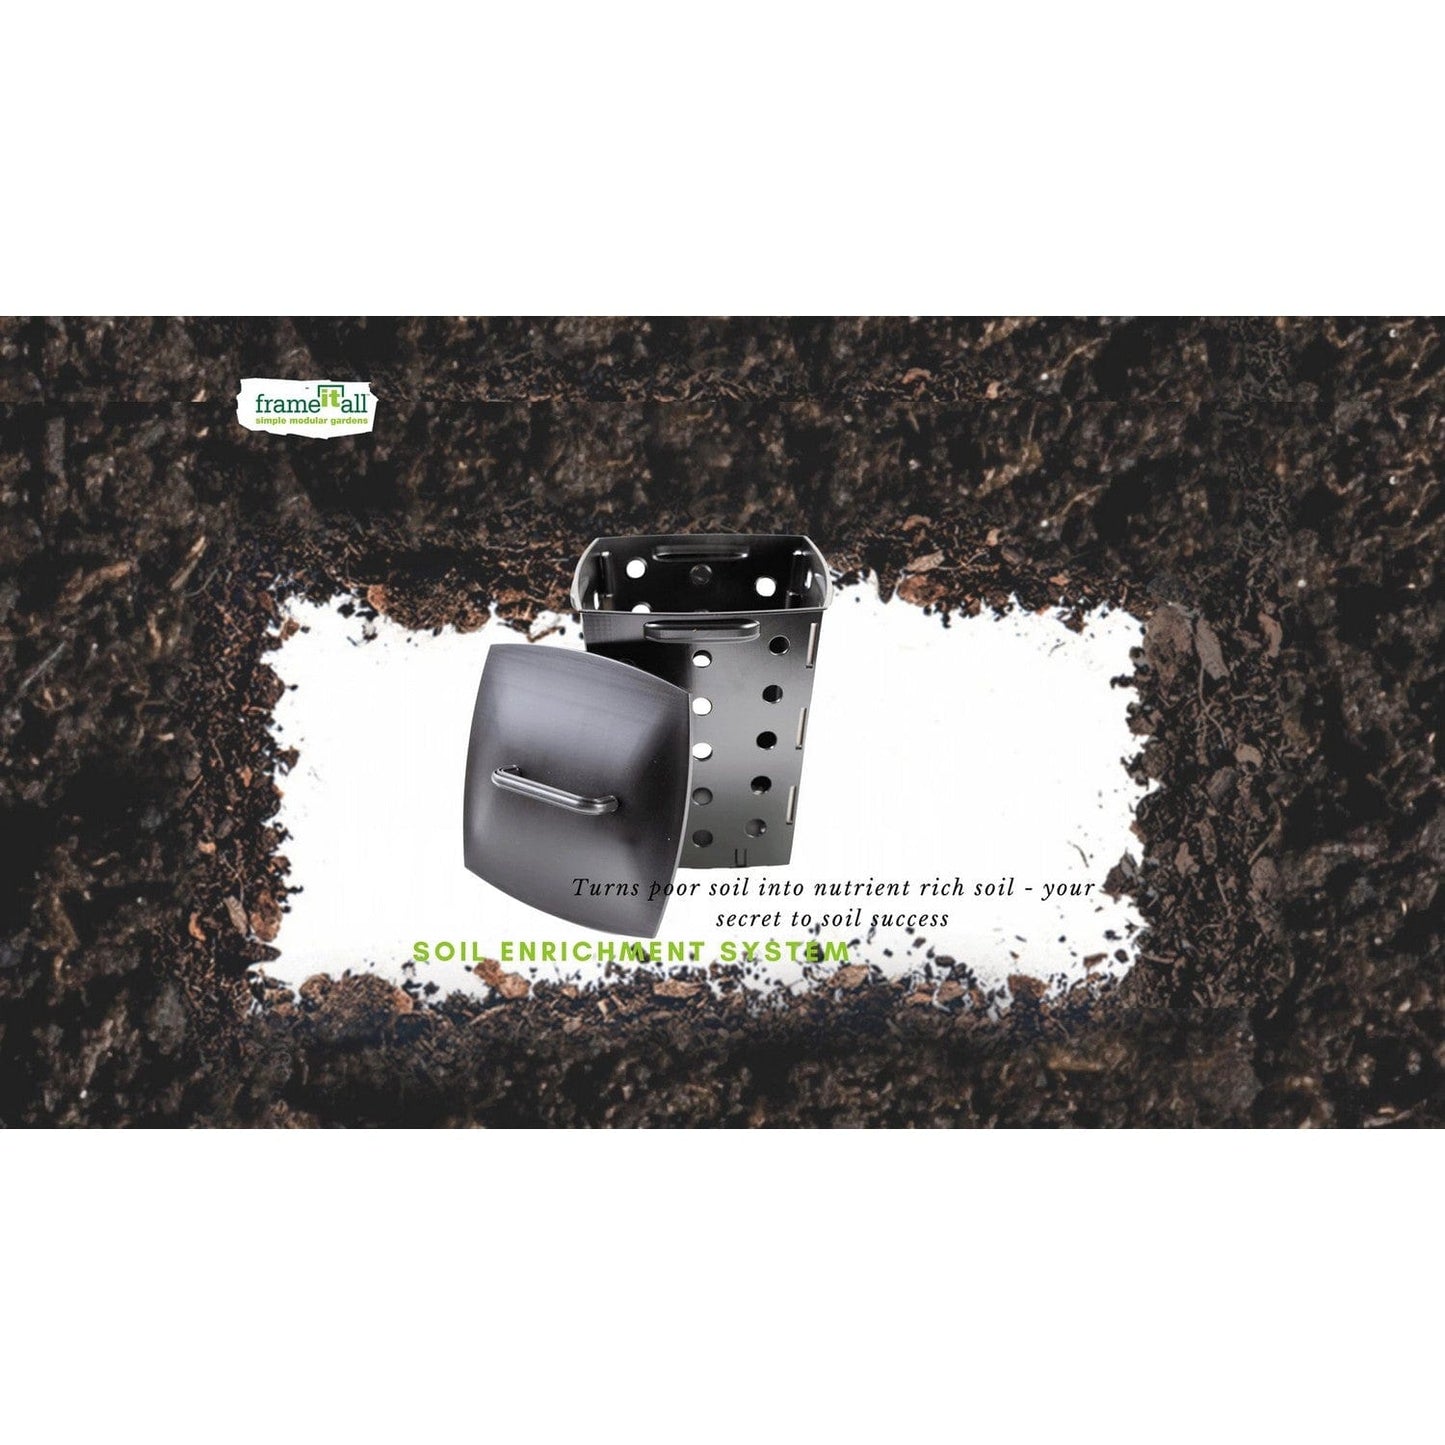 Frame It All Gardening Accessories Frame It All | Worm It All Soil Enrichment System 300001605